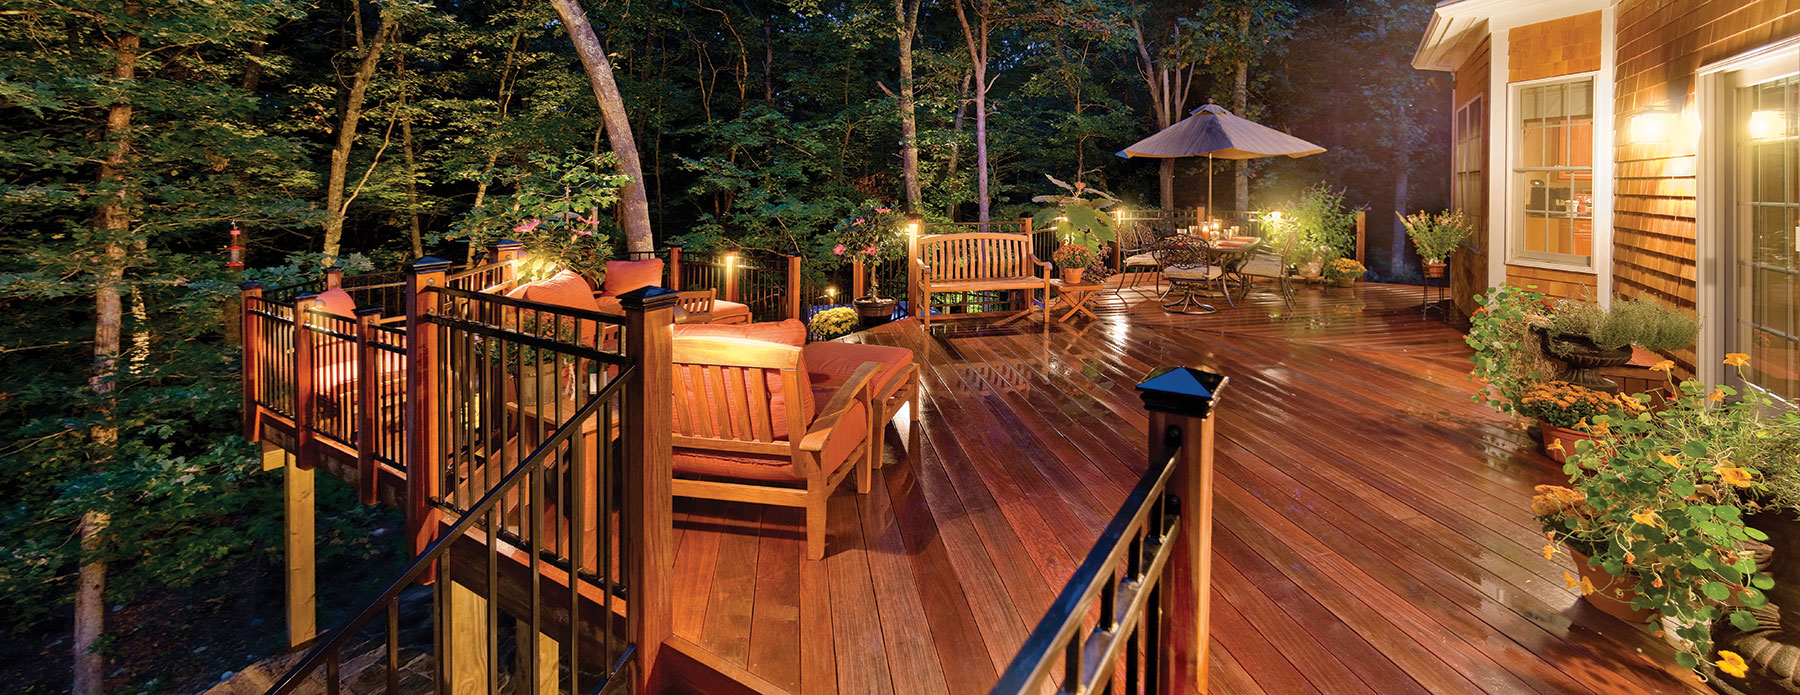 Deck with specialty lighting